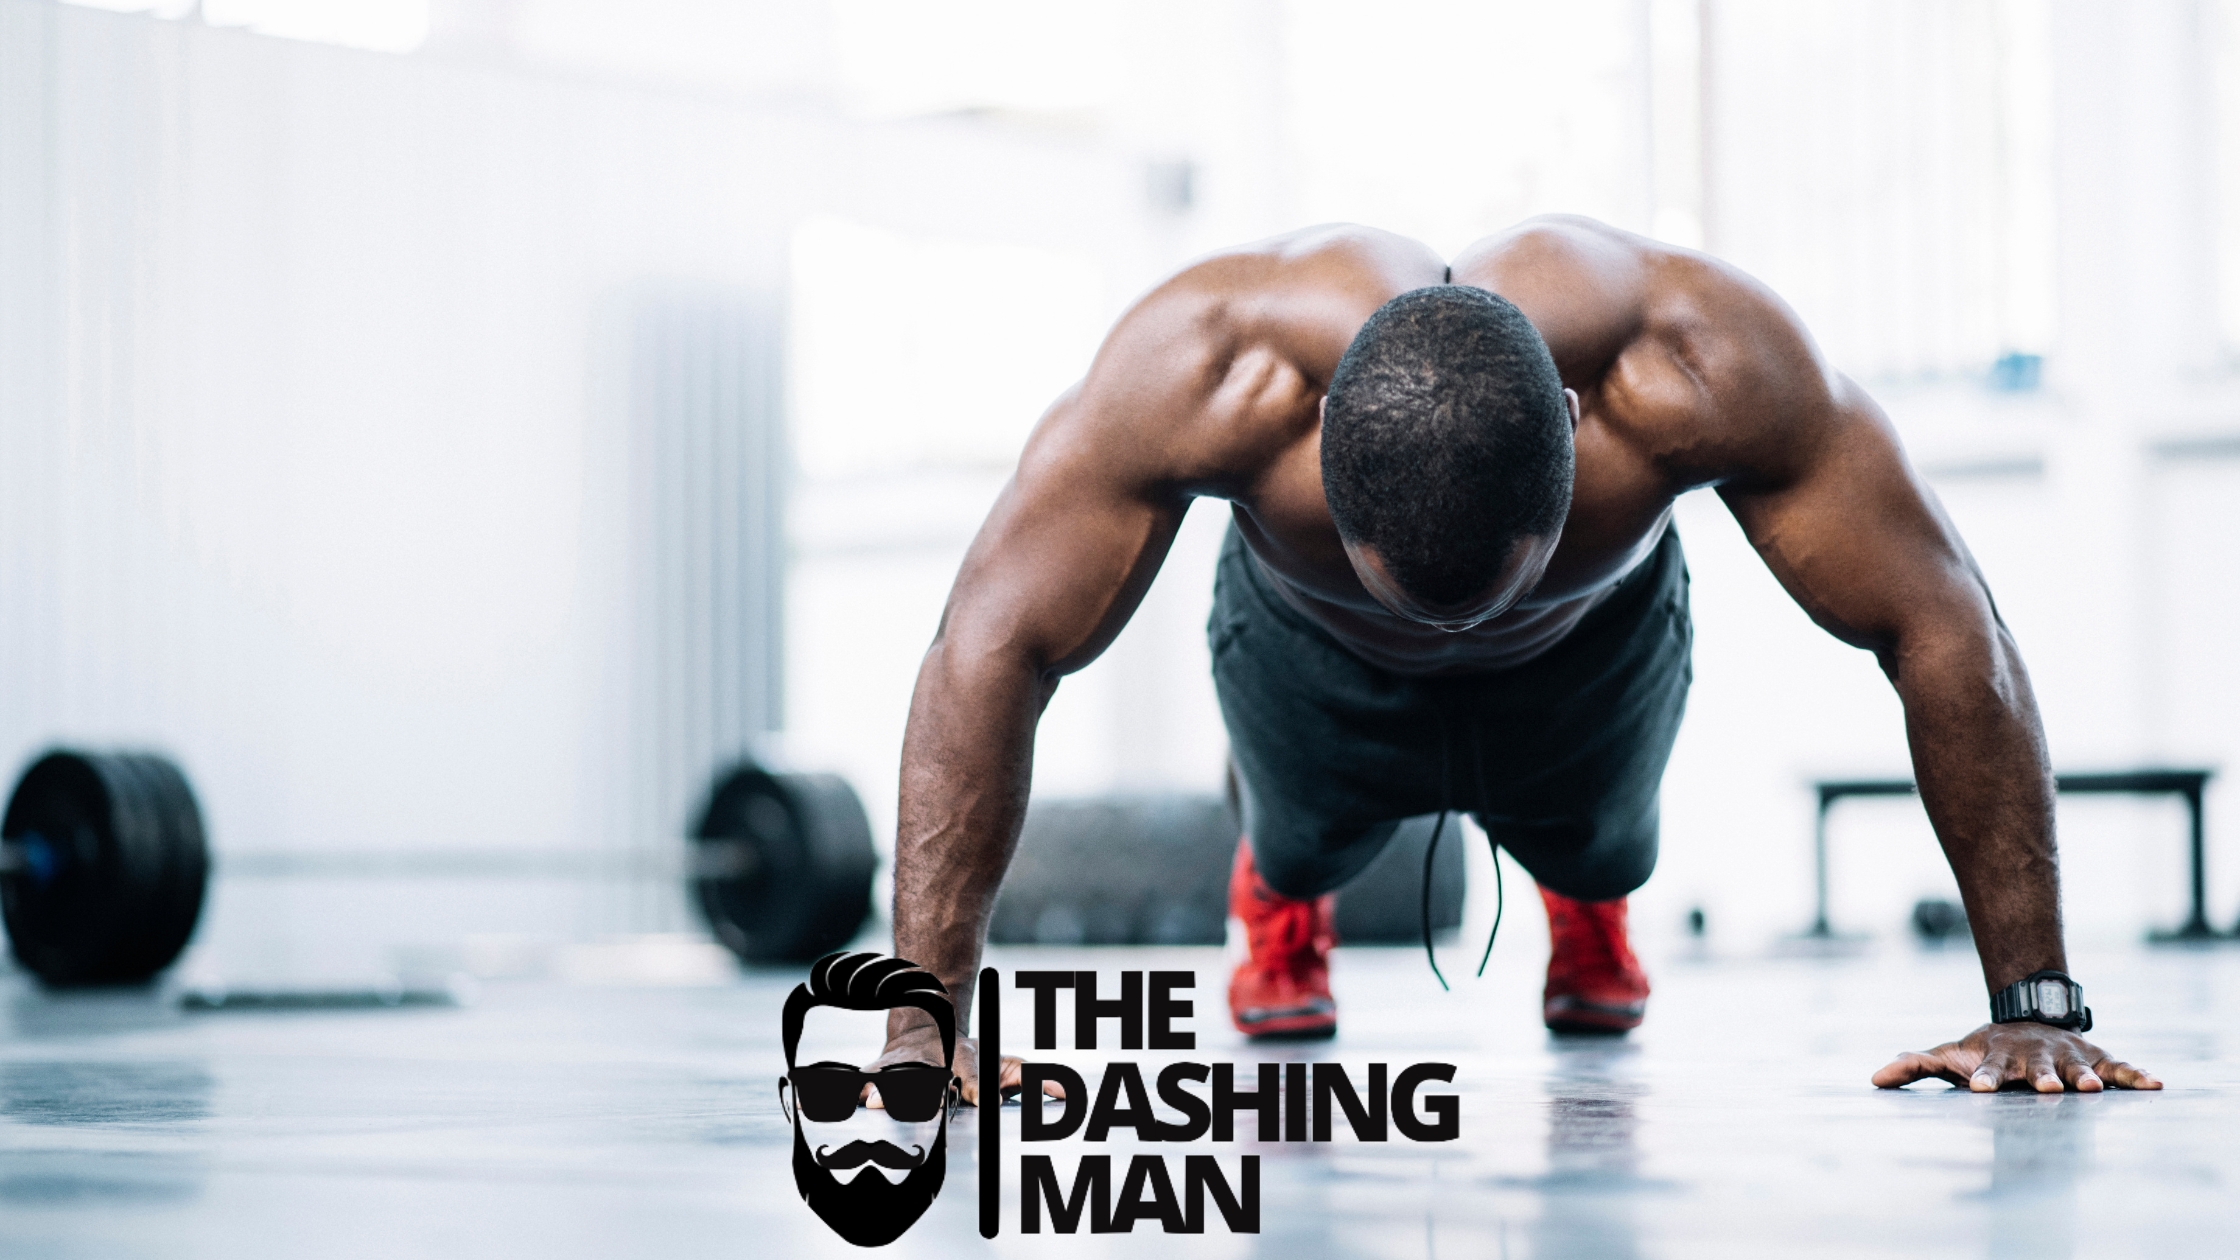 Building Mass and Strength For Men